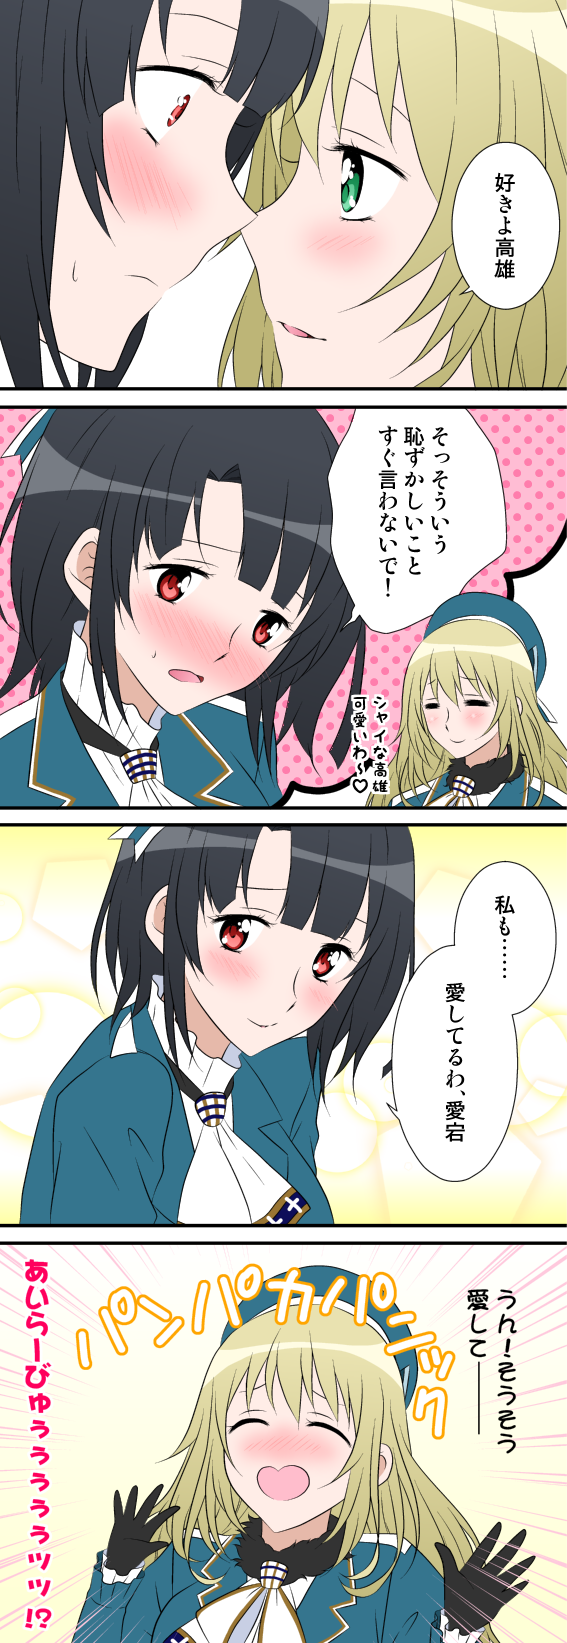 2girls 4koma =_= ^_^ ascot atago_(kantai_collection) beret black_glove black_hair blonde_hair blush bust closed_eyes comic eye_contact green_eyes hat highres incipient_kiss kantai_collection long_hair looking_at_another multiple_girls open_mouth red_eyes short_hair smile takao_(kantai_collection) translation_request udon_(shiratama) yuri